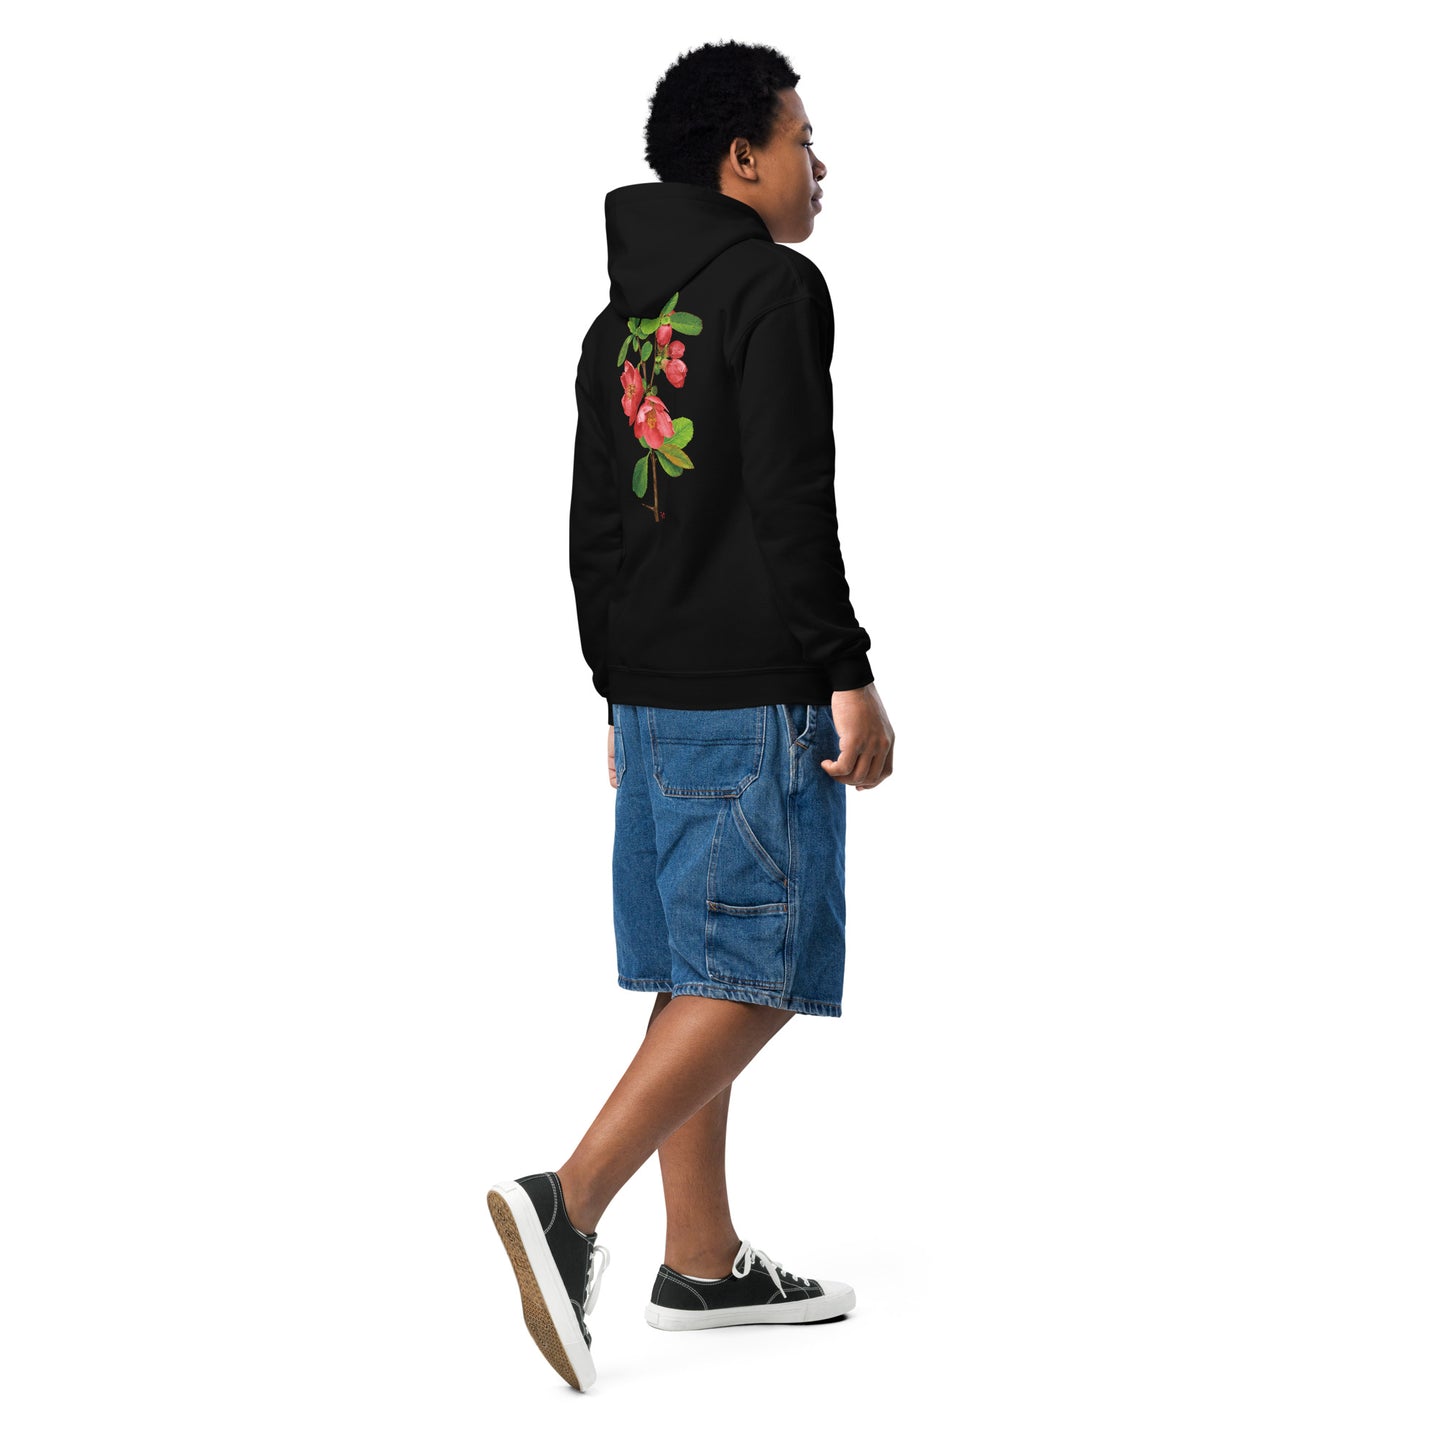 Chinese quince Youth heavy blend hoodie